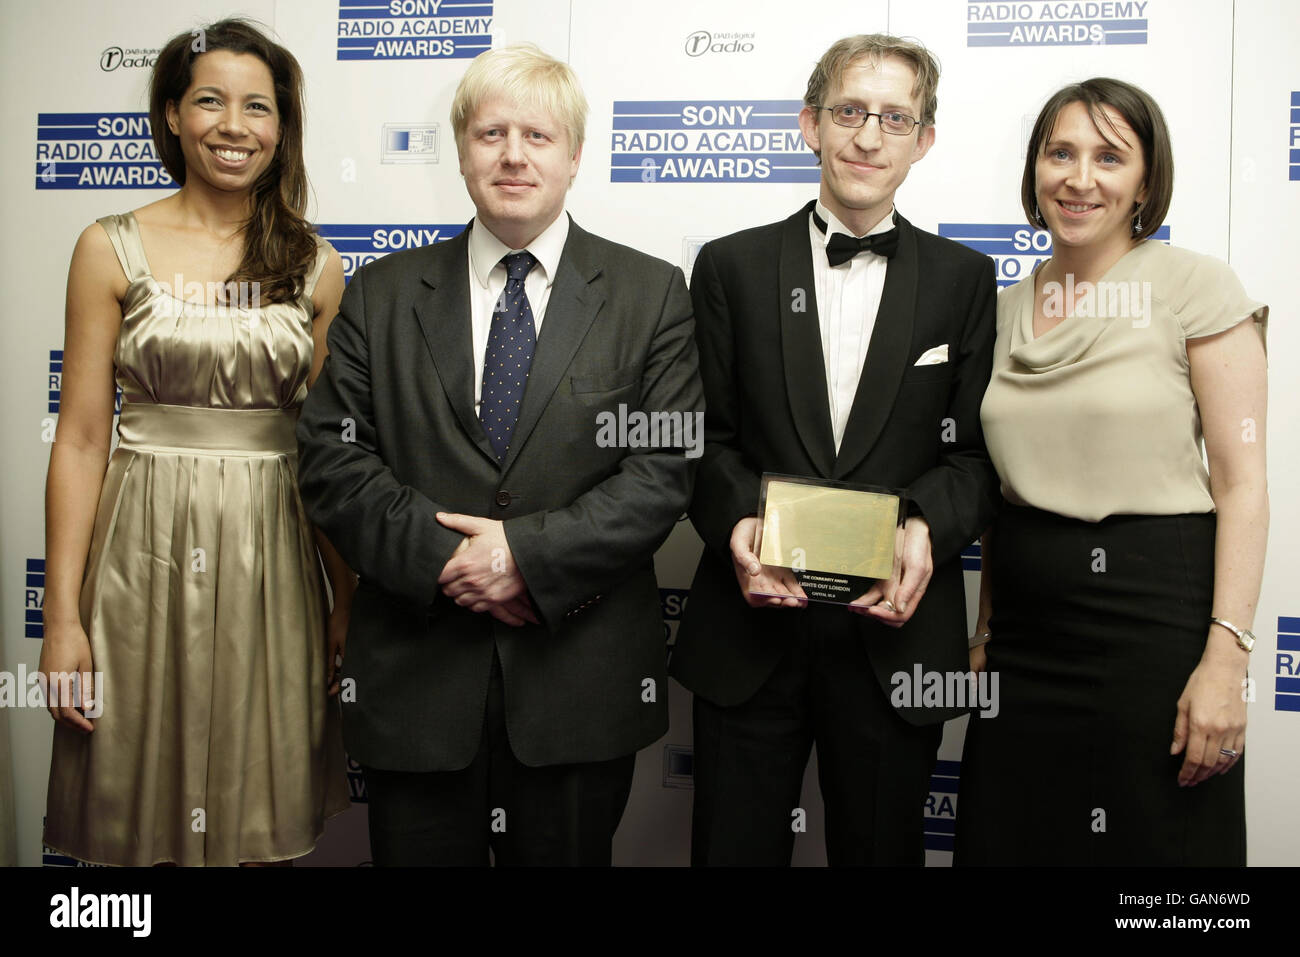 Boris Johnson, Mayor of London, in the press room with members of Capital Radio during the Sony Radio Academy Awards at the Grosvenor House Hotel in central London. Stock Photo